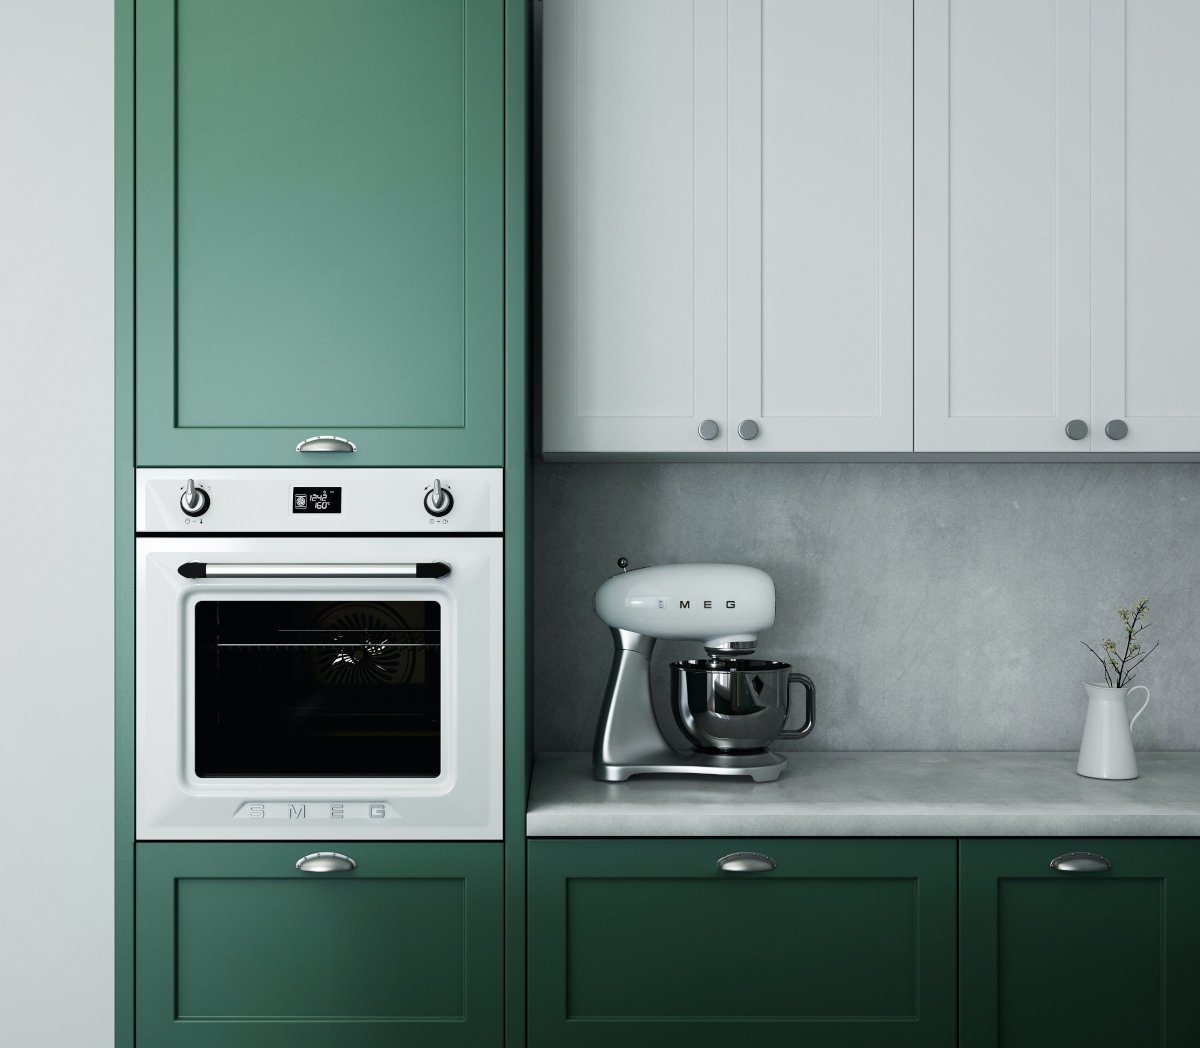 A bold colored green kitchen cabinet